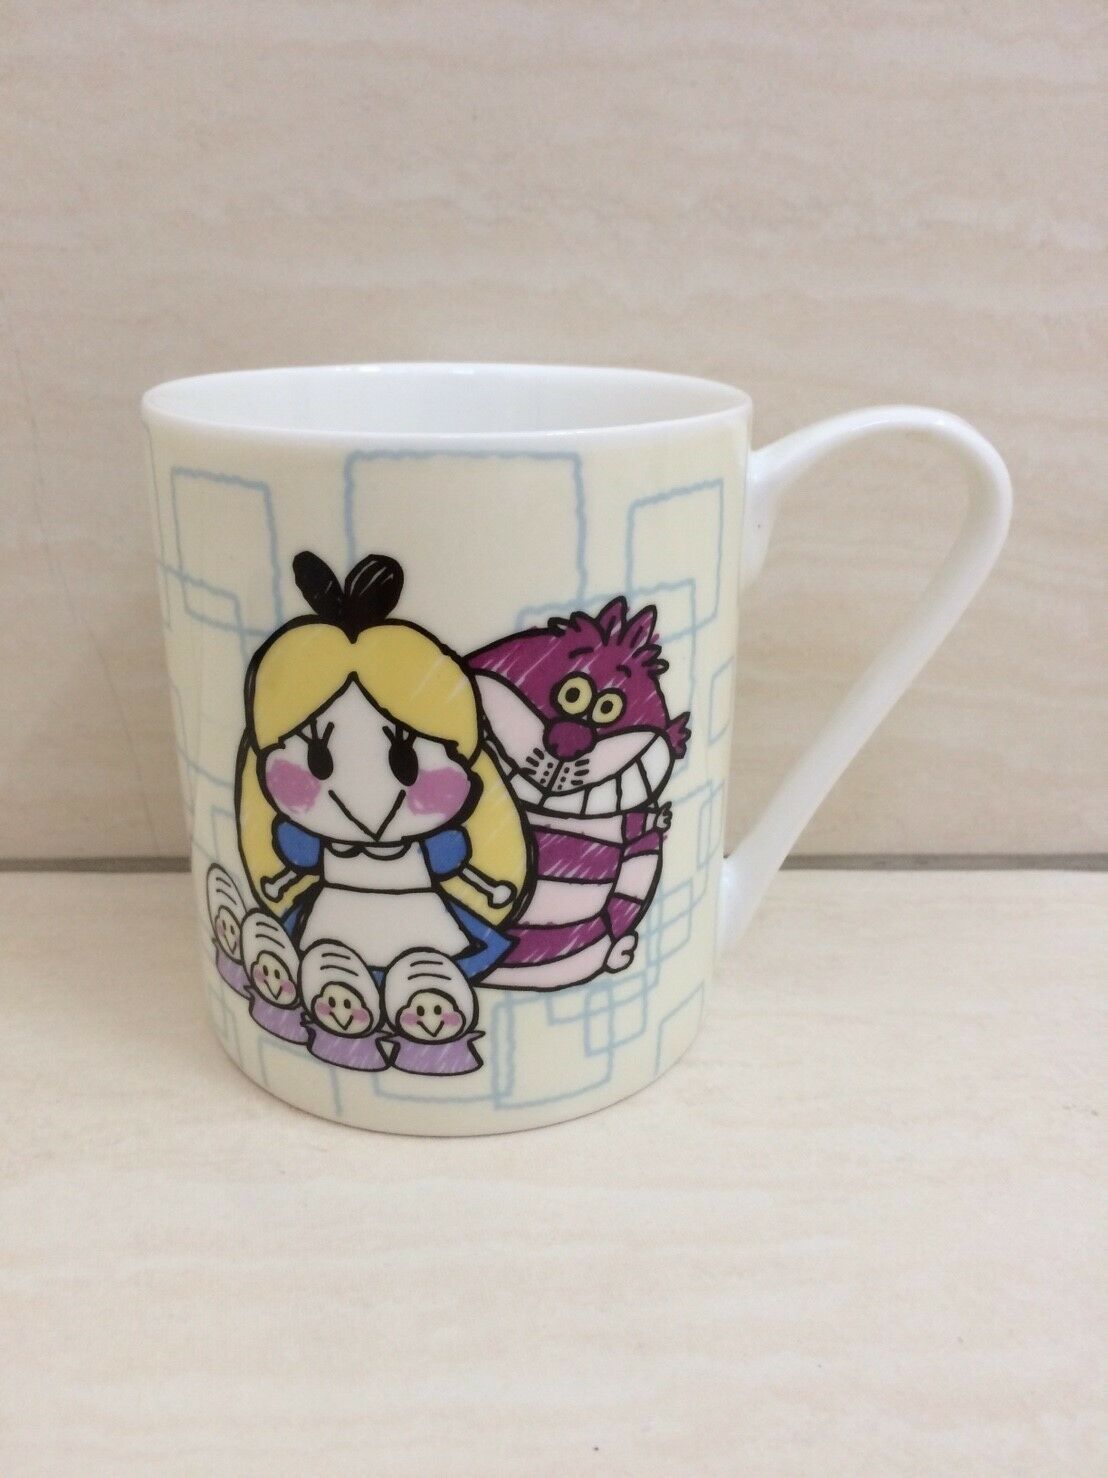 Disney Cheshire Cat, Oyster Shell and Alice in Wonderland Ceramic Cup Mug. RARE - $33.00